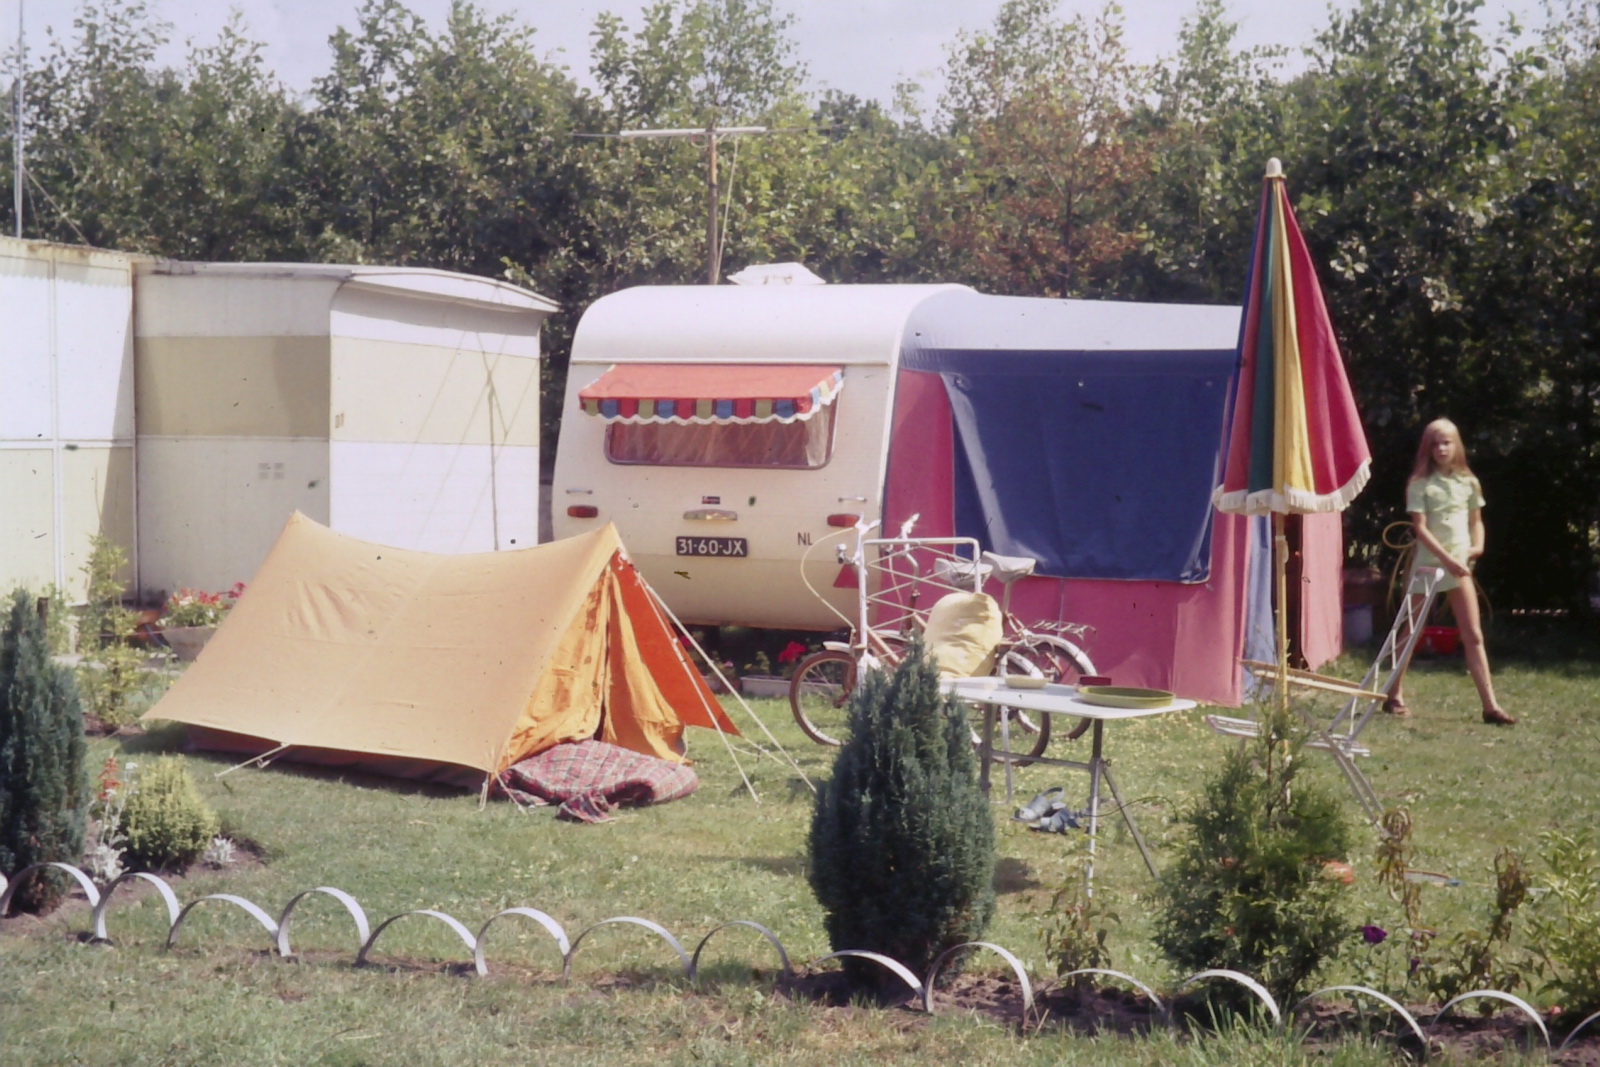 the tent is set up in a yard outside a camper